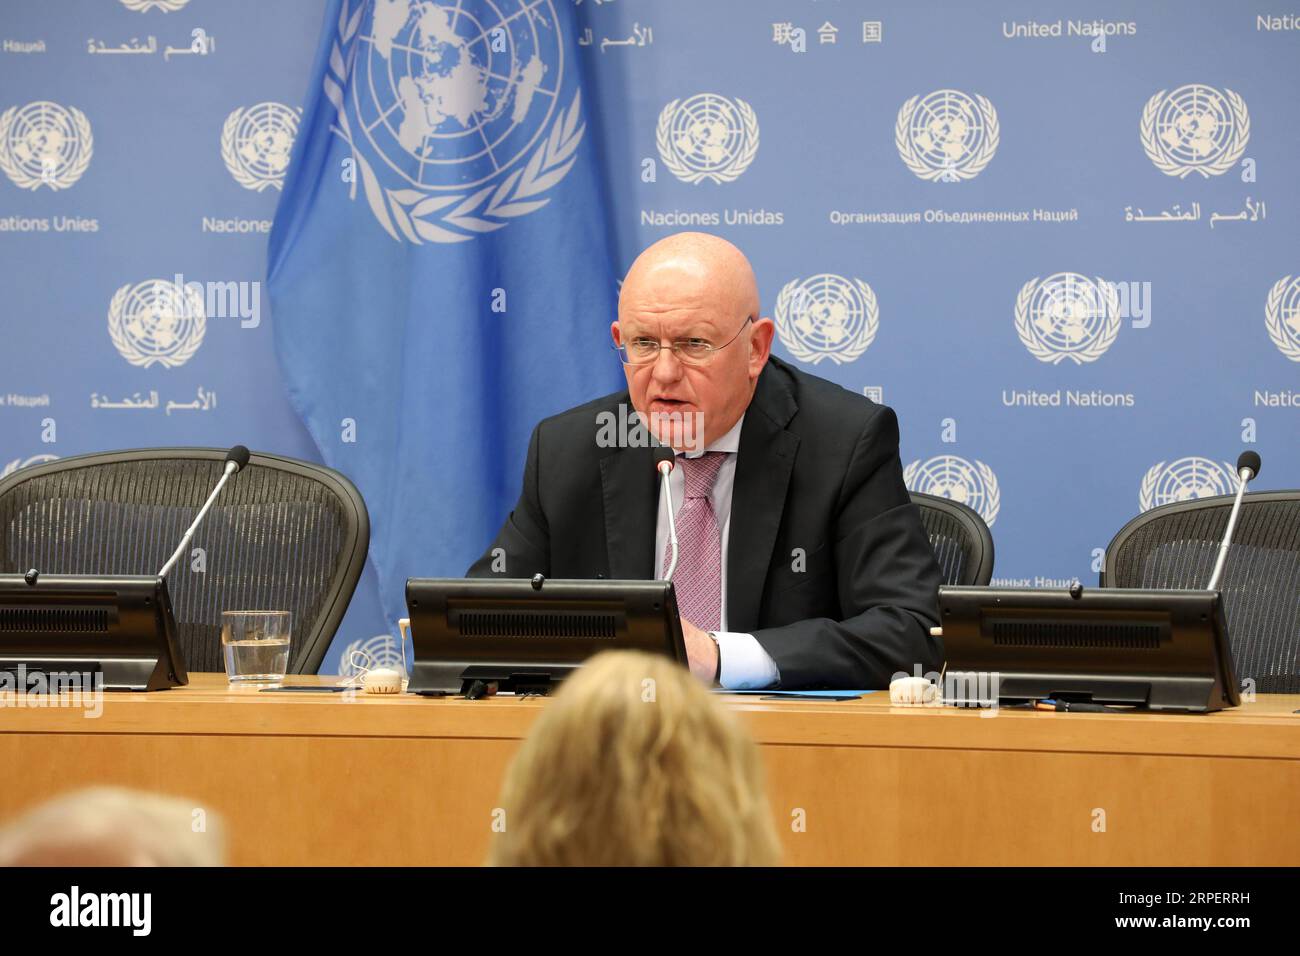 (190903) -- UNITED NATIONS, Sept. 3, 2019 -- Vassily Nebenzia, Russia s UN ambassador and president of the Security Council for the month of September, speaks to journalists during a press briefing at the UN headquarters in New York, on Sept. 3, 2019. United Nations Security Council will highlight UN cooperation with regional organizations and the settlement of African problems in September, Vassily Nebenzia said Tuesday. ) UN-SECURITY COUNCIL-RUSSIA-PRESS BRIEFING MaxJianguo PUBLICATIONxNOTxINxCHN Stock Photo